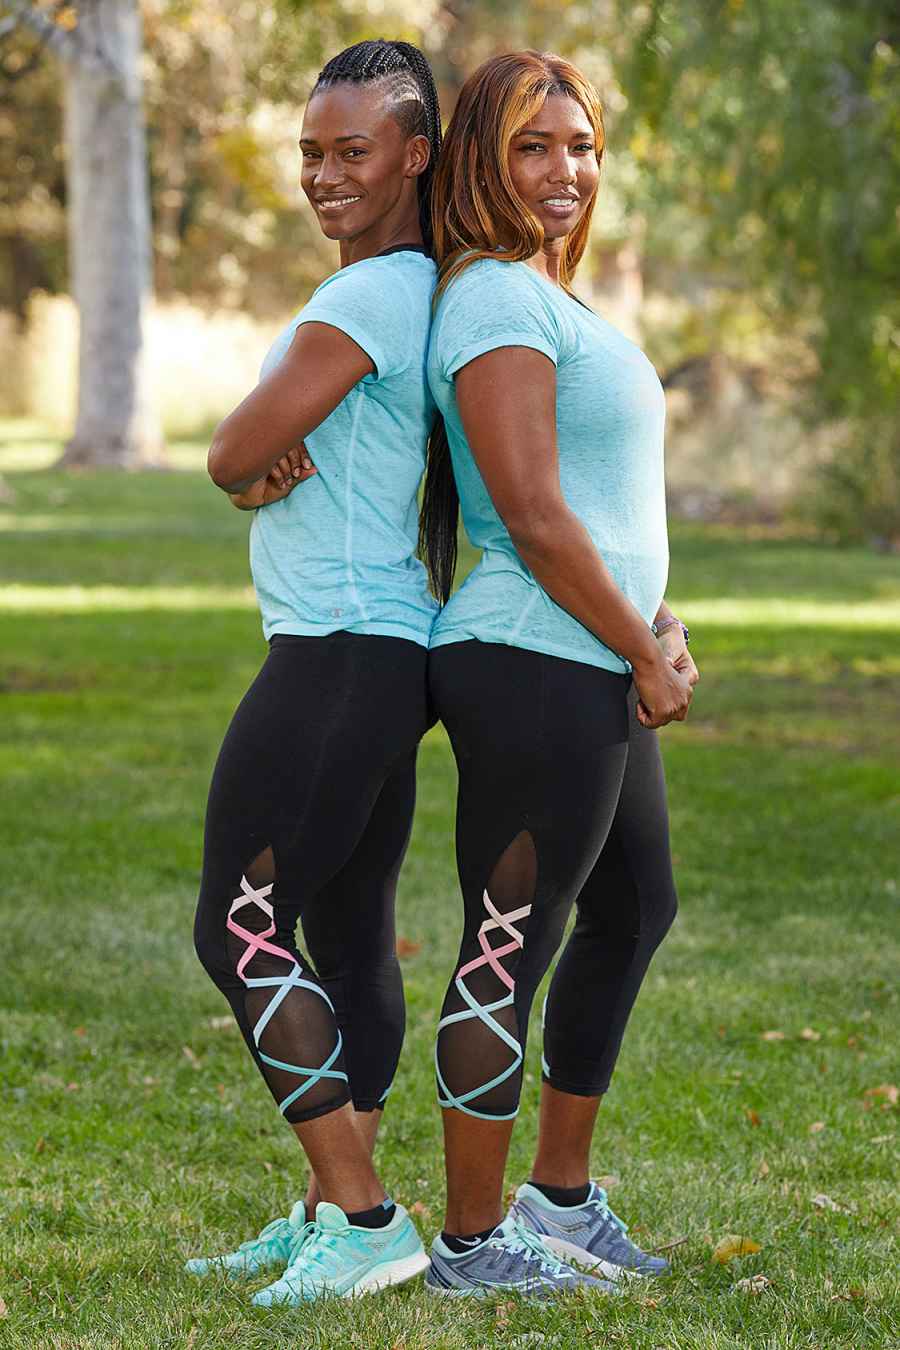 Kellie Brinkley and LaVonne Idlette Meet the Teams Competing on The Amazing Race